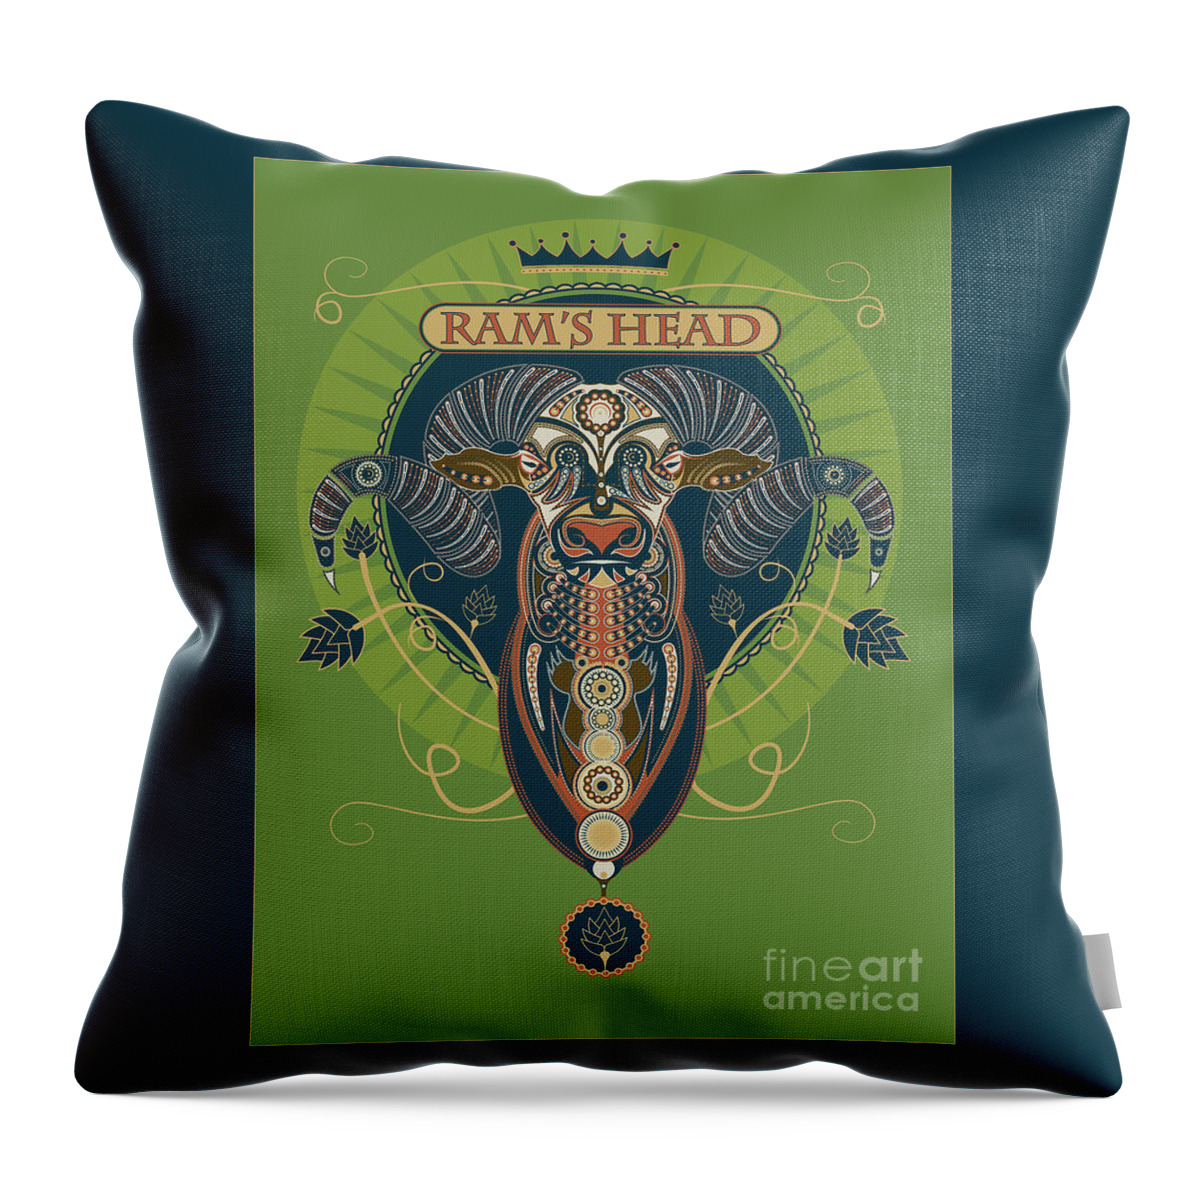 Ram Throw Pillow featuring the digital art Rams Head by Mike Massengale